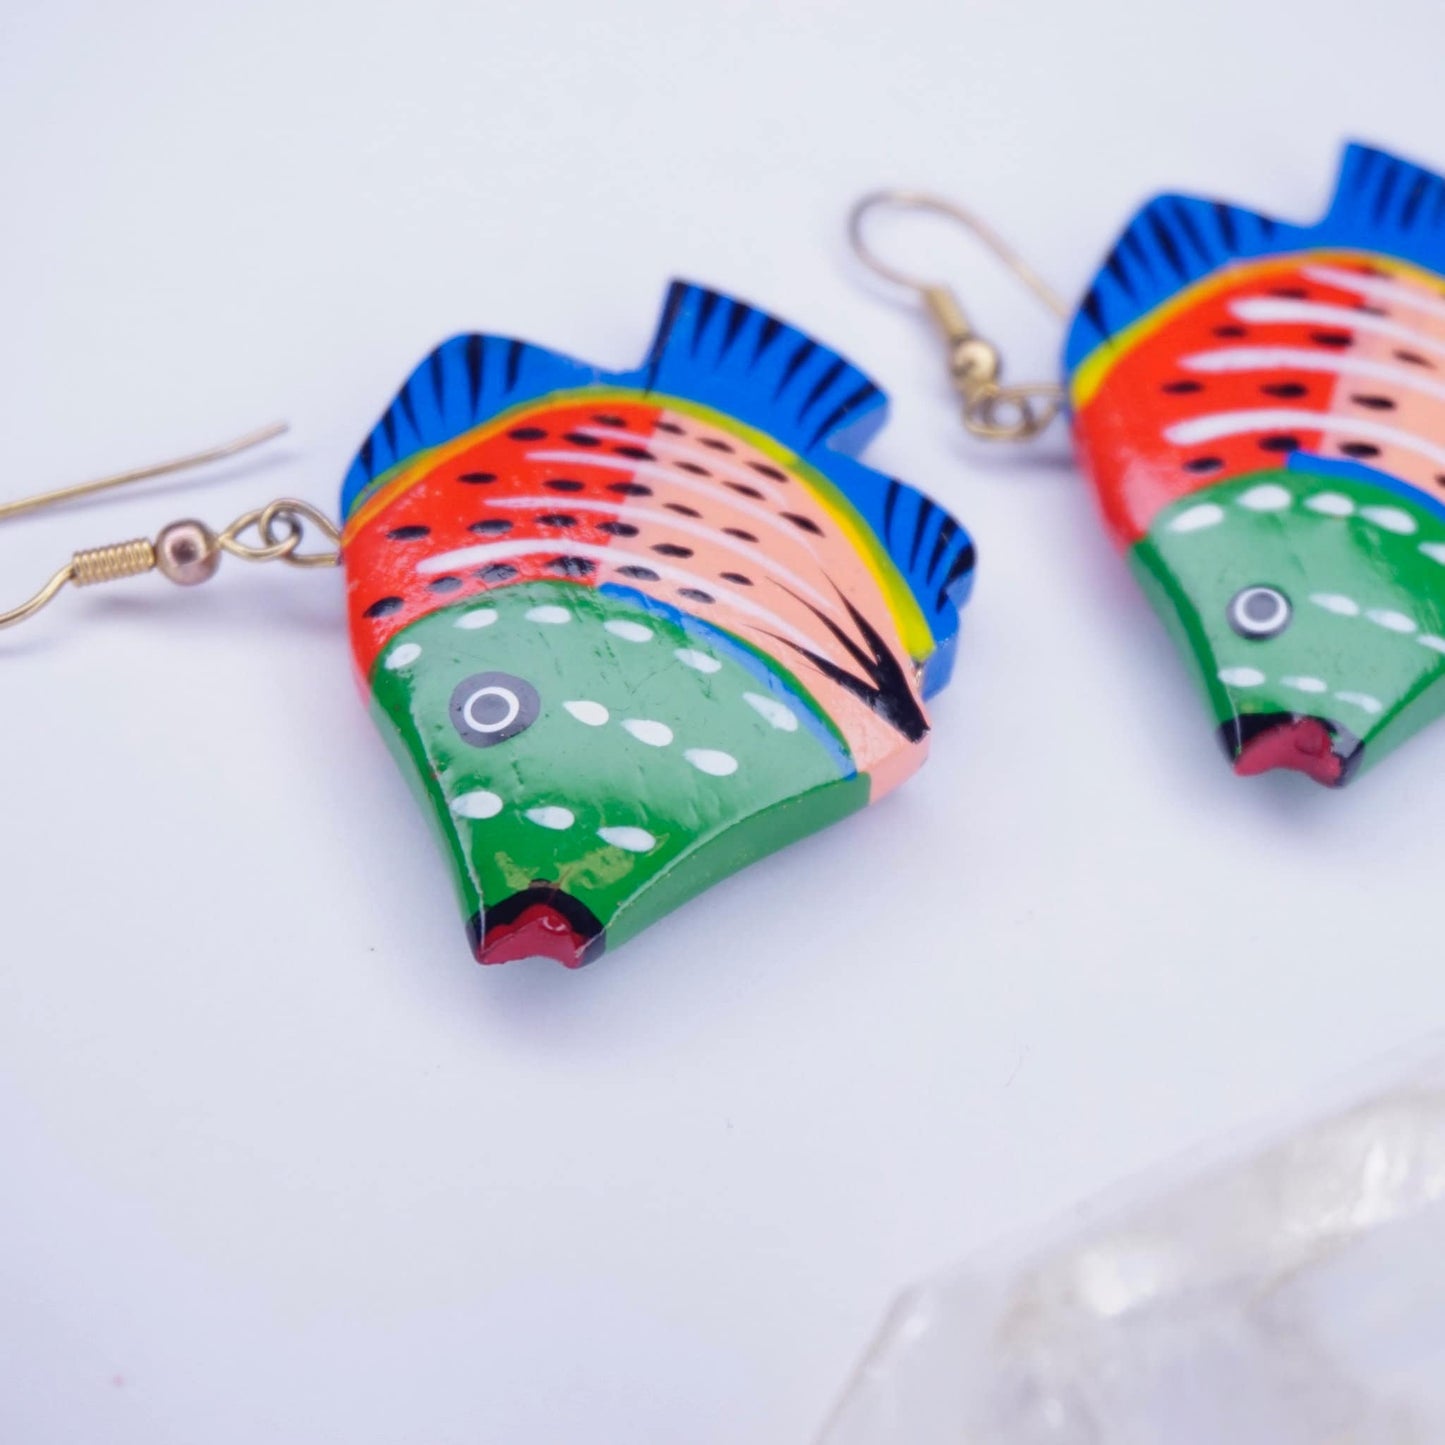 Colorful vintage wood carved fish dangle earrings with vibrant blue, red, and green painting on a white background, handmade wooden statement jewelry.